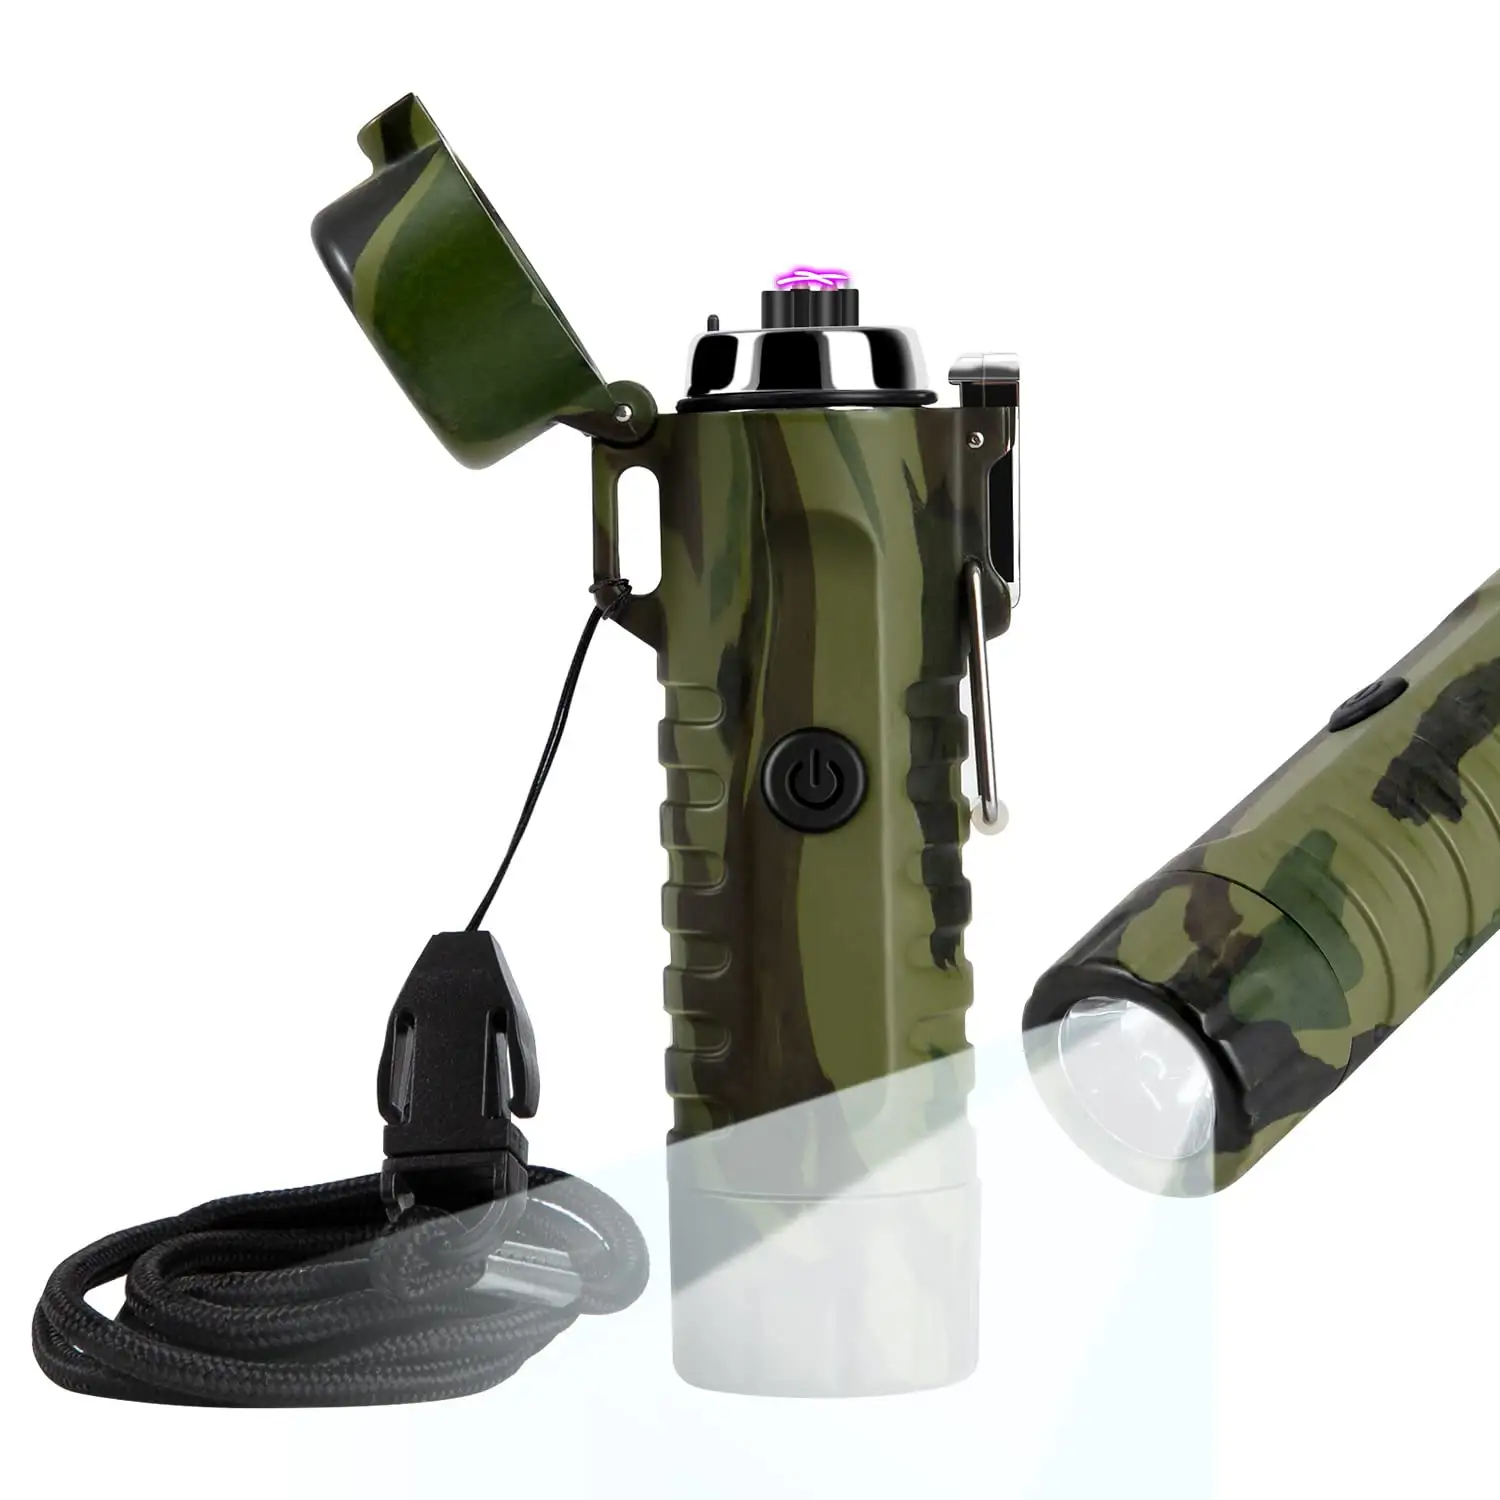 Windproof Waterproof Outdoor Lighter Dual Arc Electric USB Rechargeable Lighters for Adventure Survival Tactical Gear